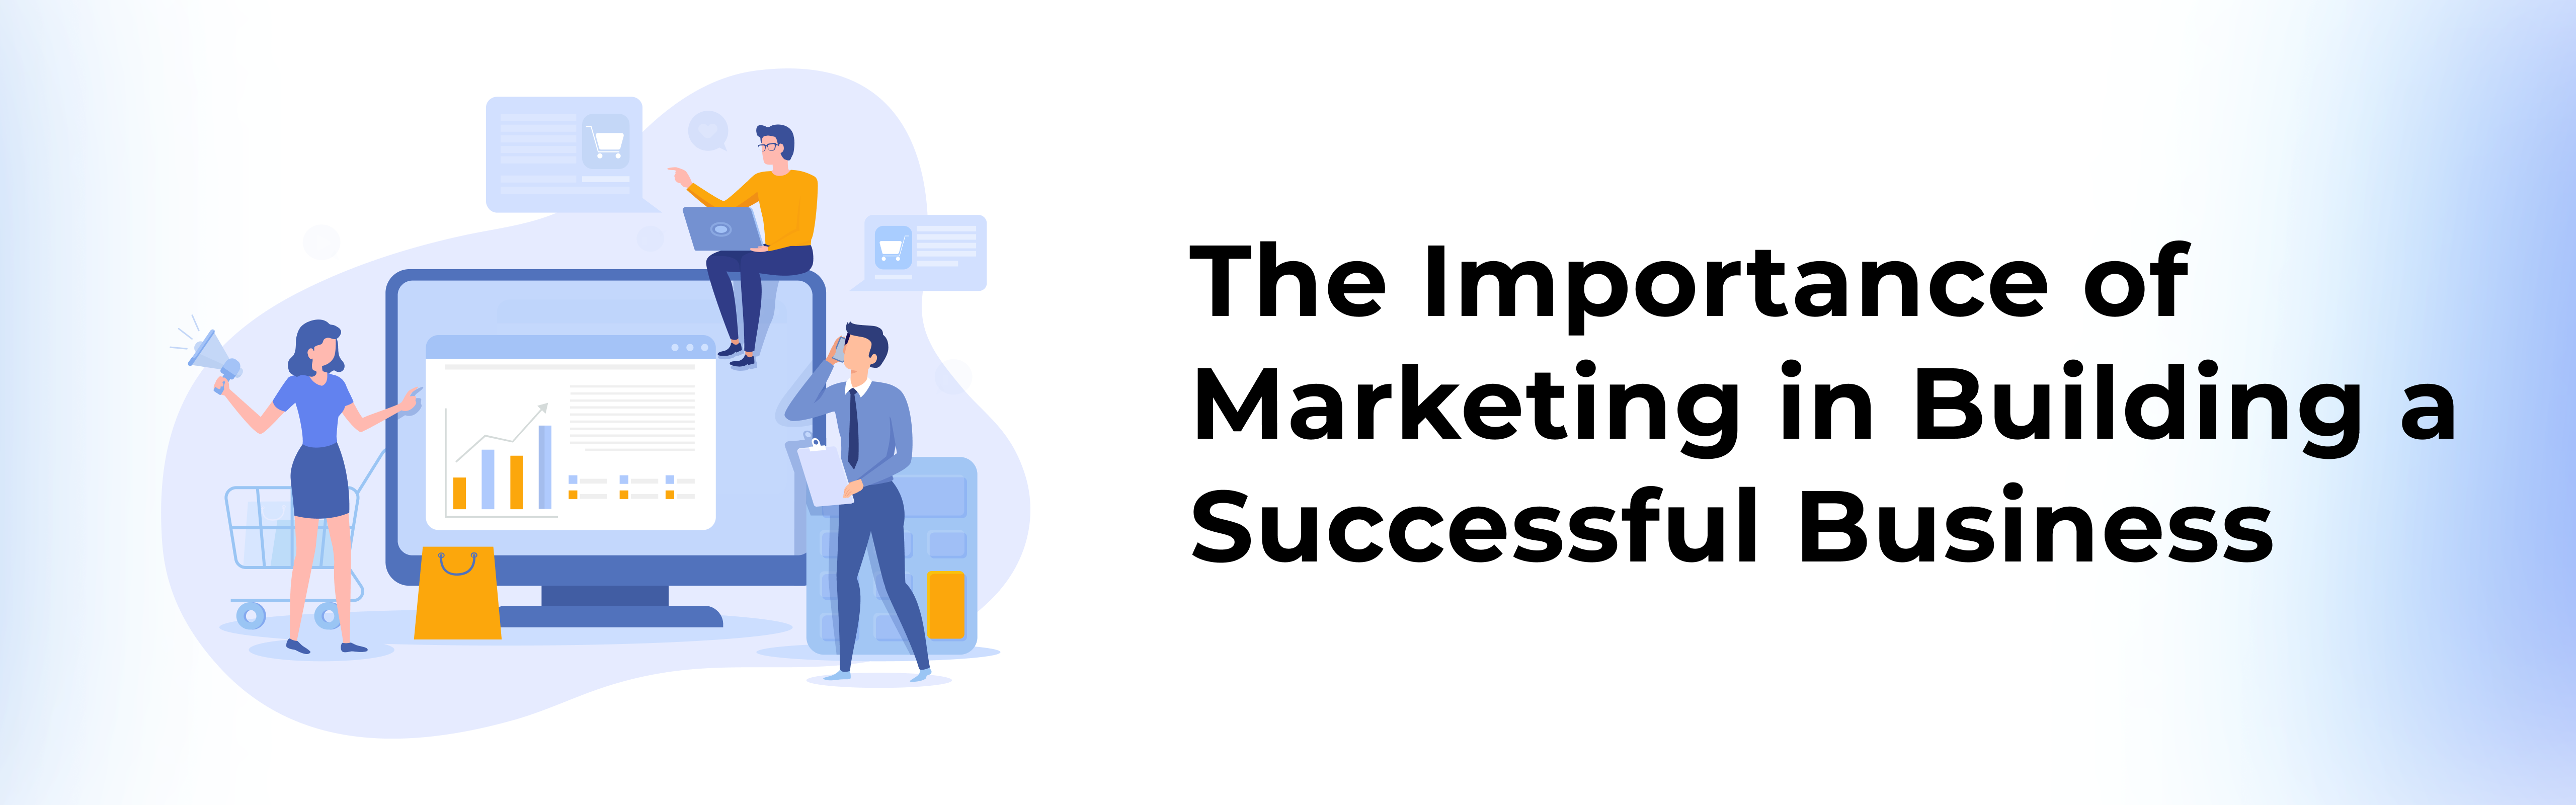 importance-of-marketing-to-build-successful-business